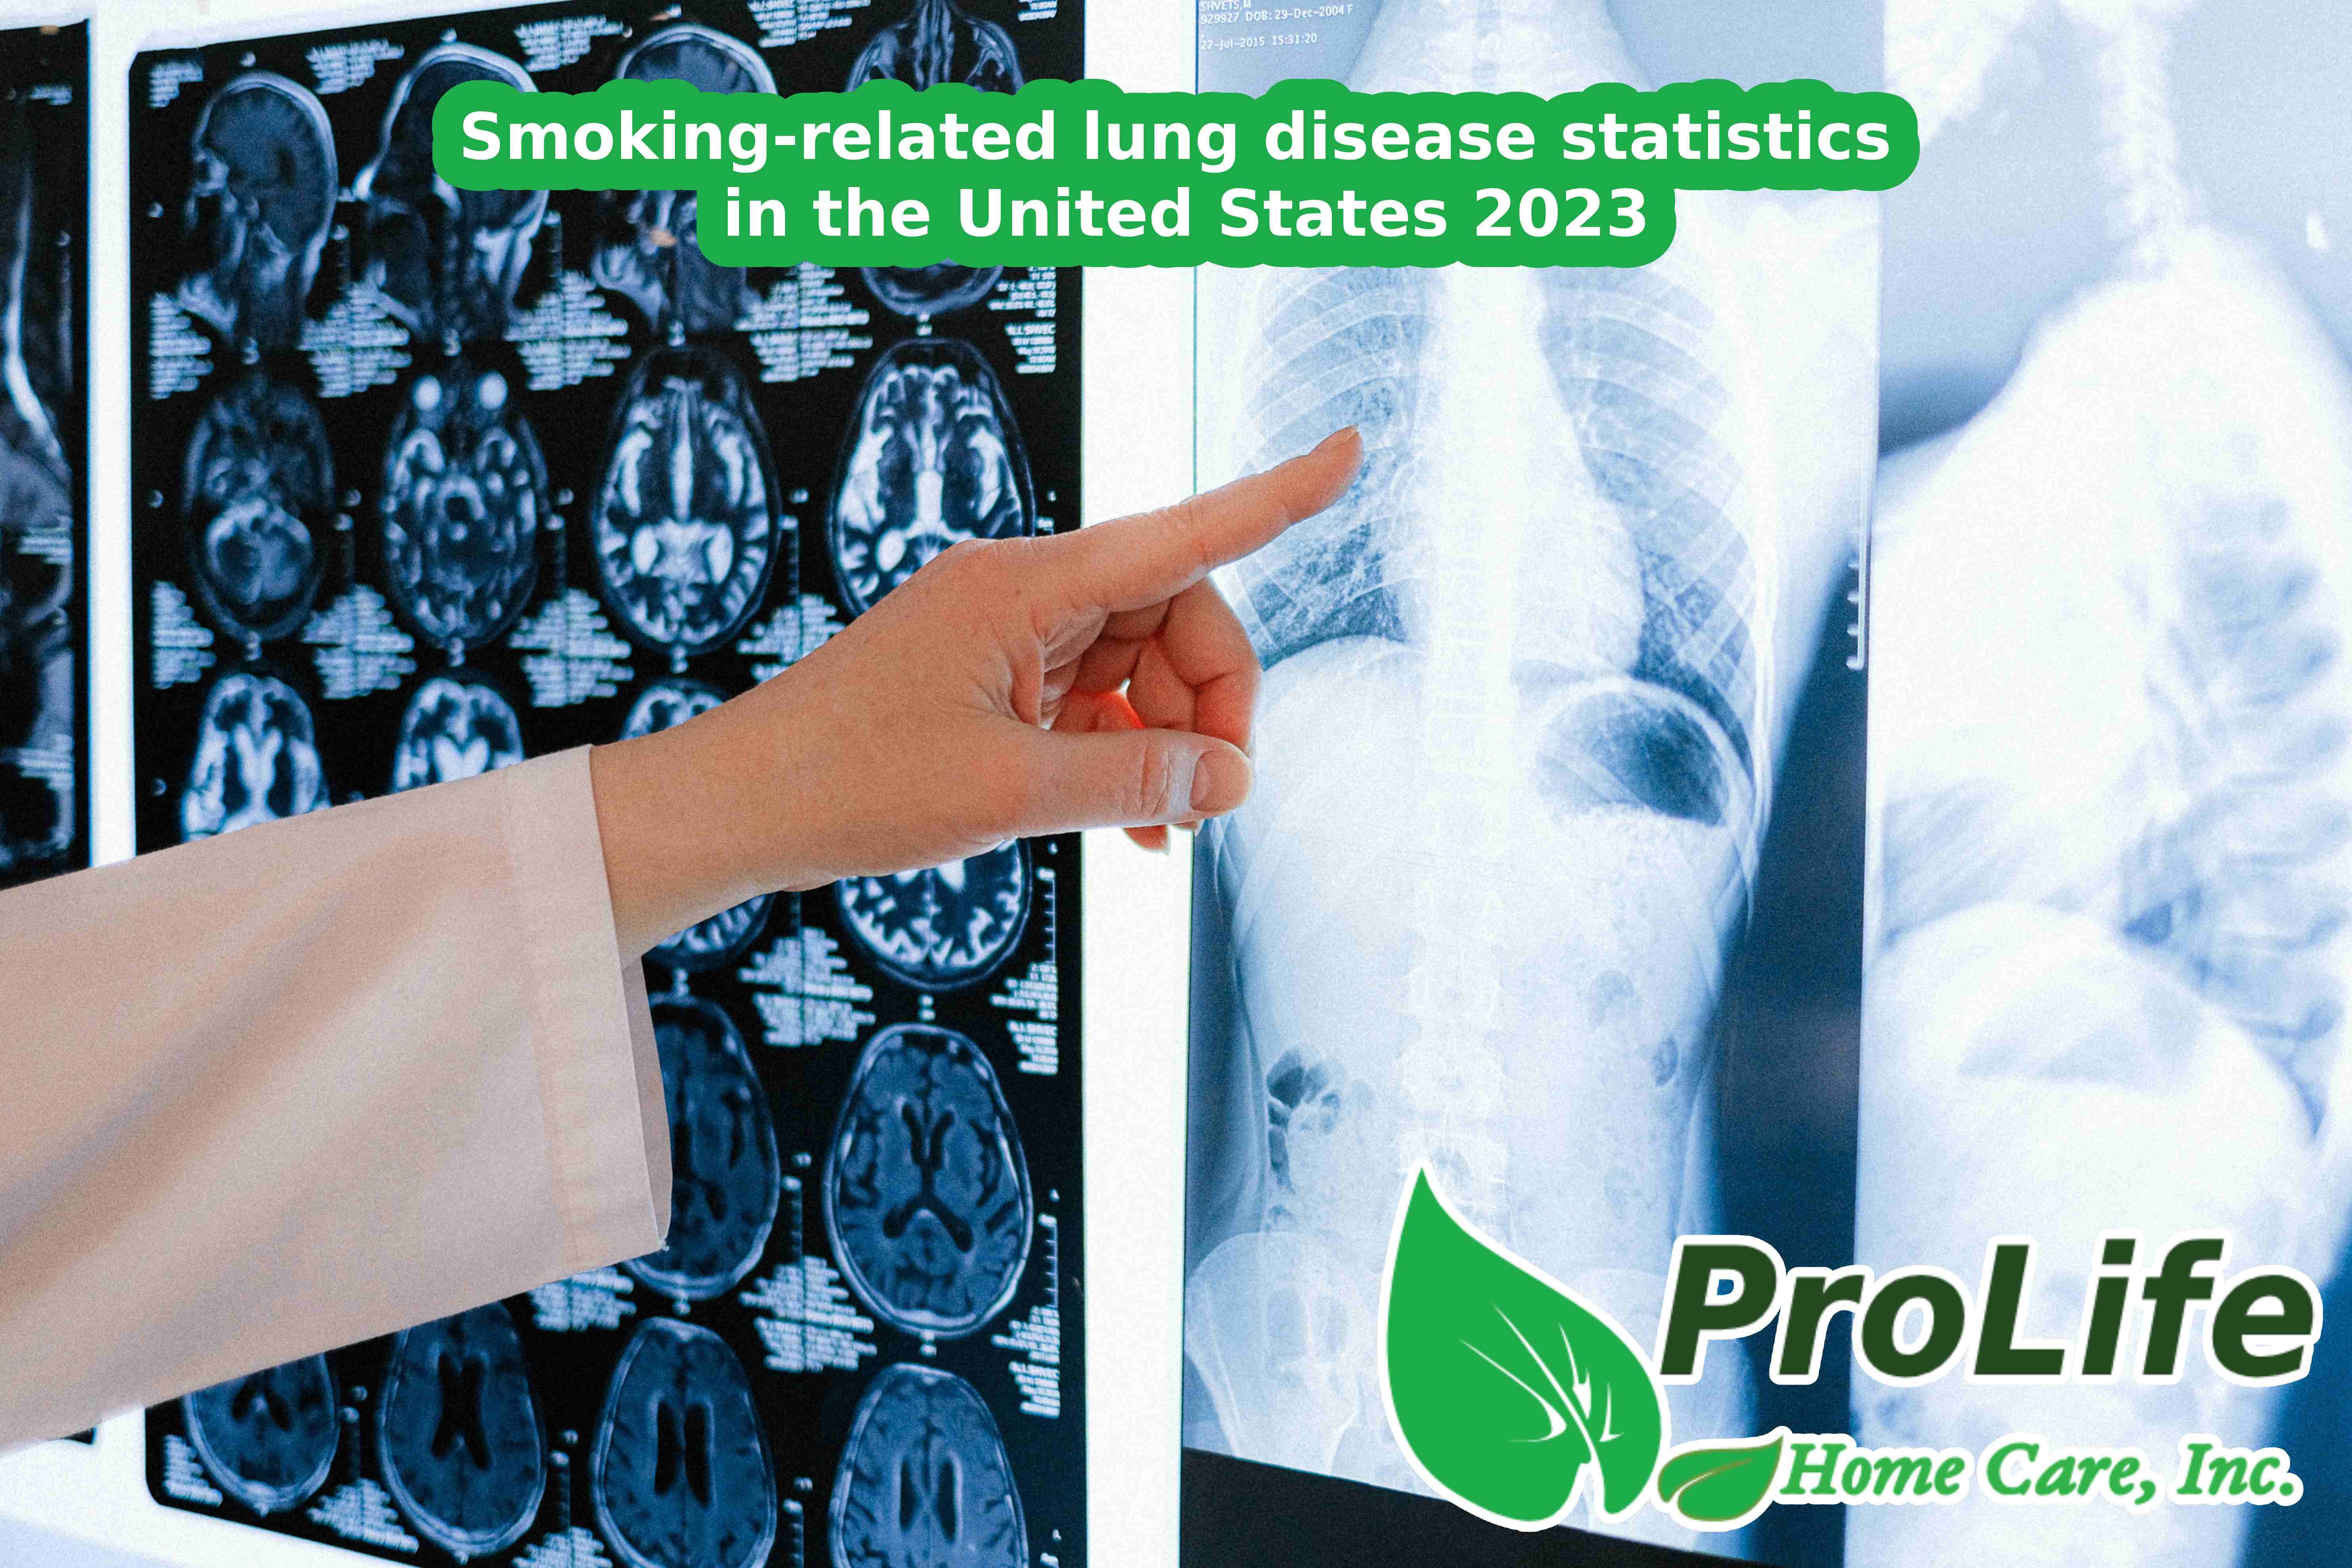 Smoking-related lung disease statistics in the United States 2023